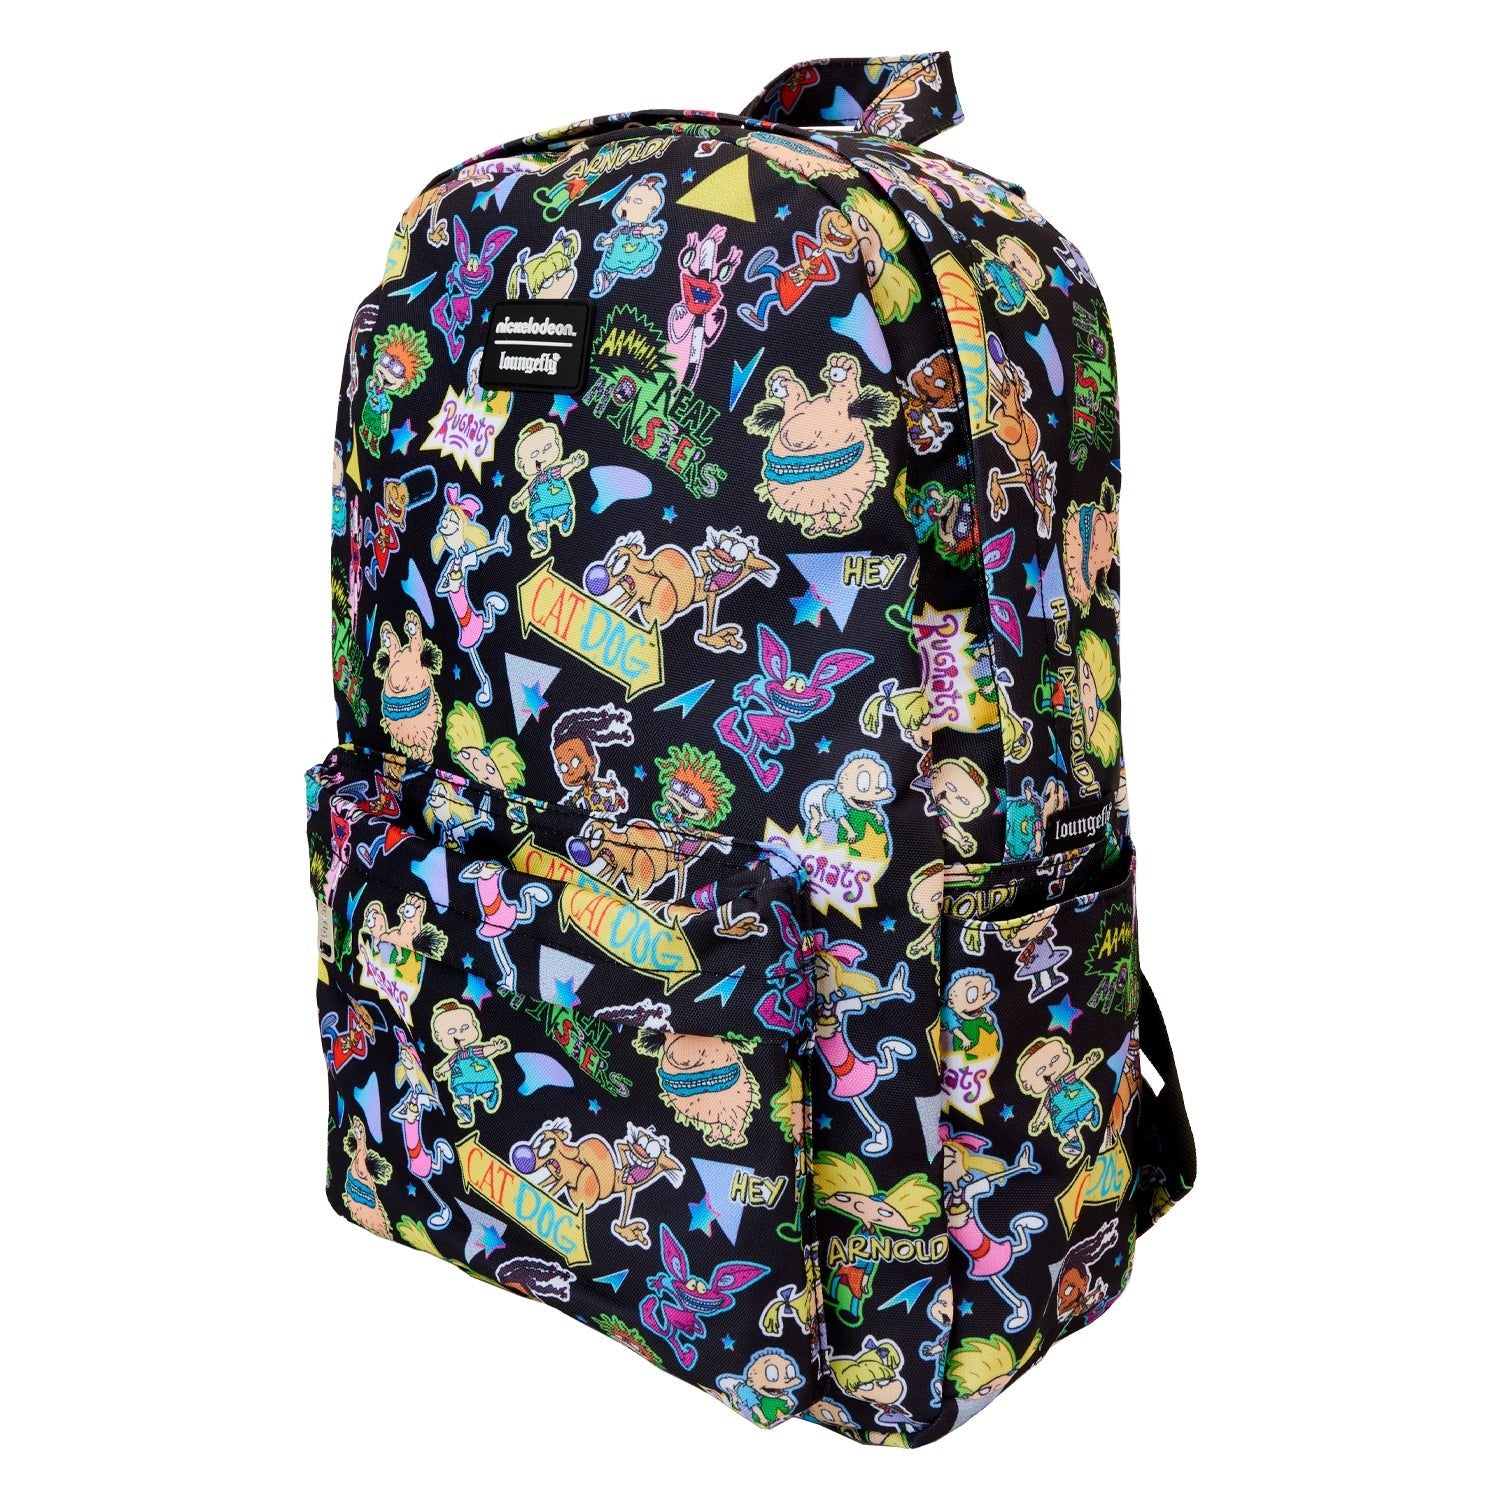 Loungefly x Nickelodeon Retro AOP Full Size Nylon Backpack - GeekCore